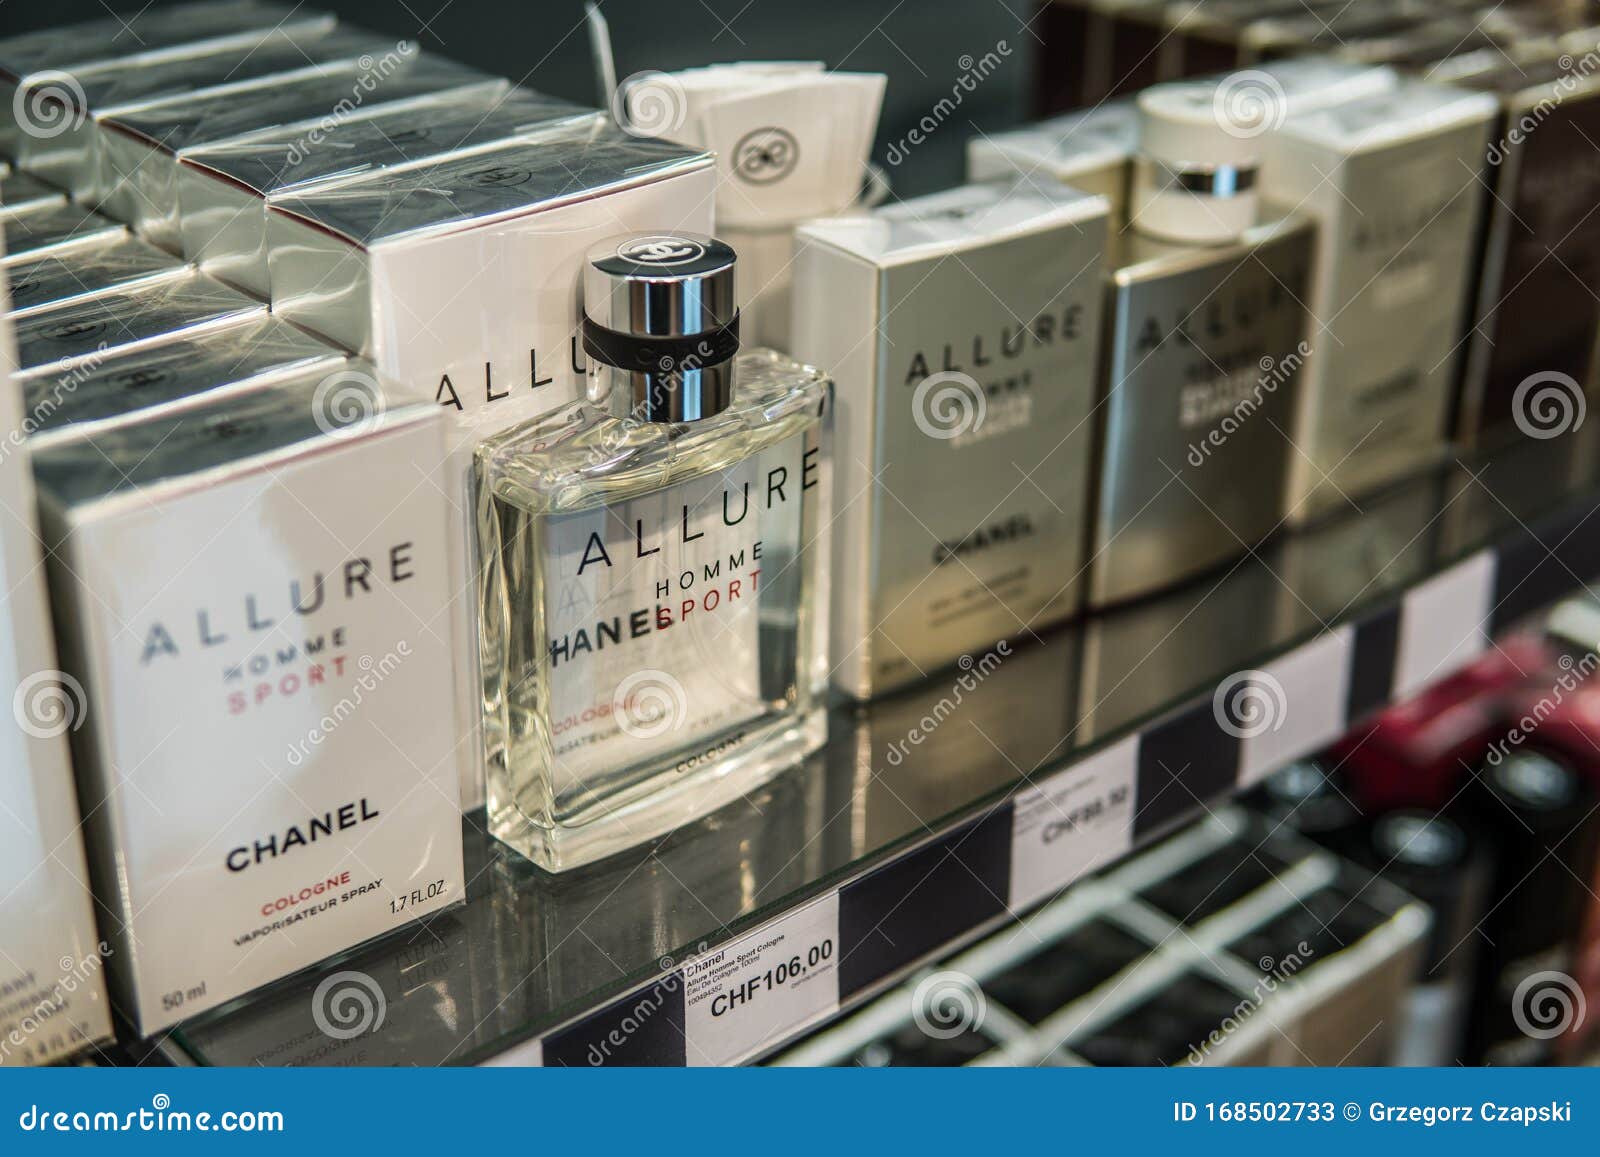 Allure Chanel Perfume on the Shop Display, Allure Chanel is